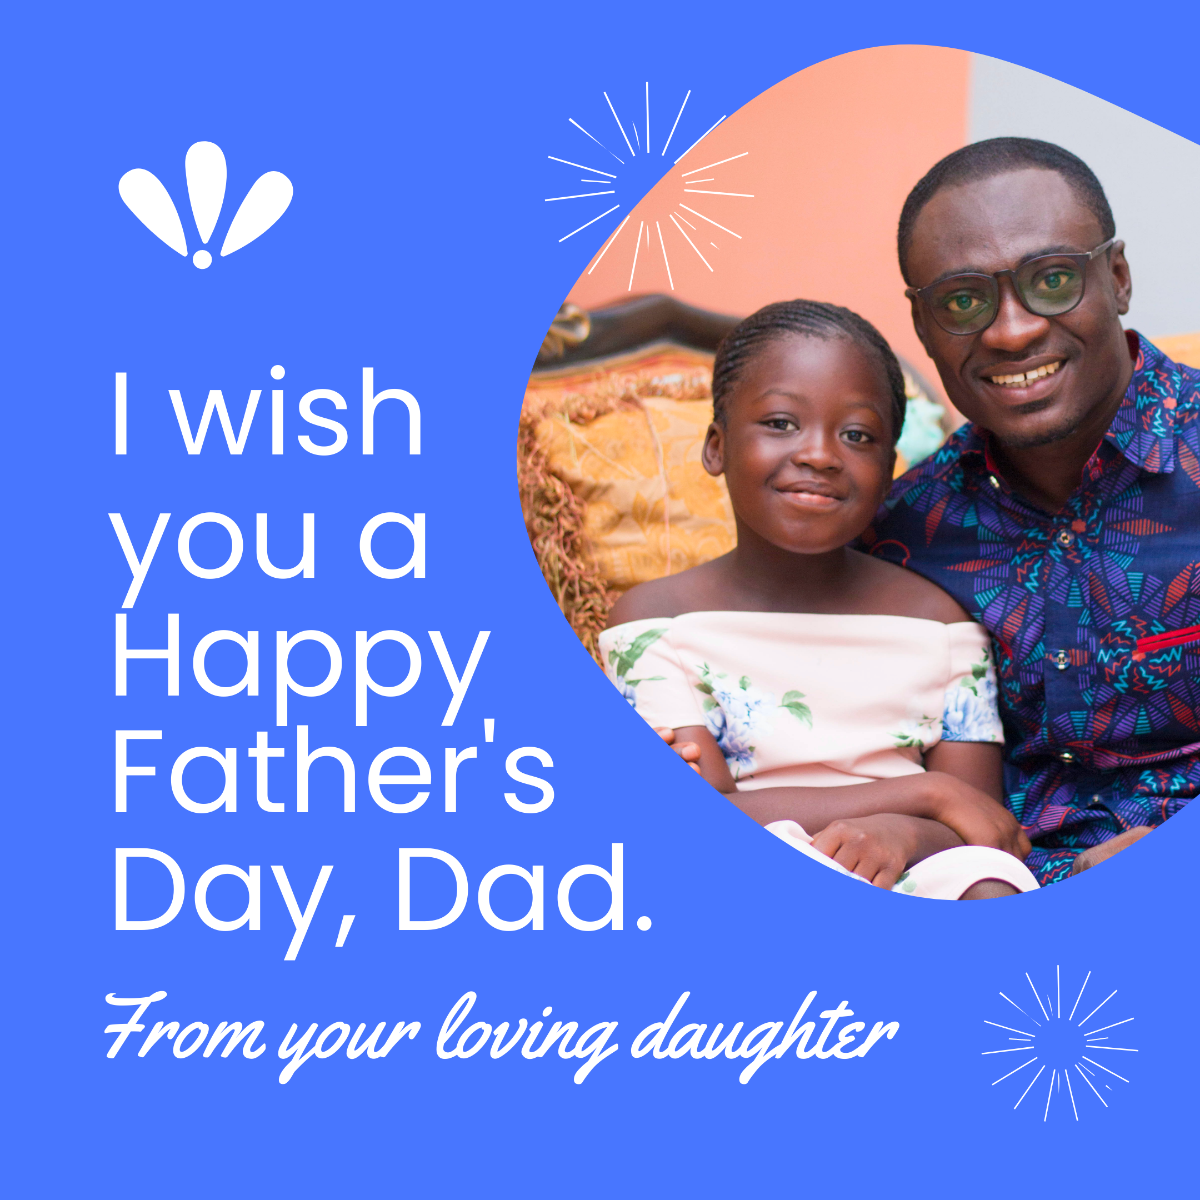 Happy Father's Day Wishes From Daughter Template